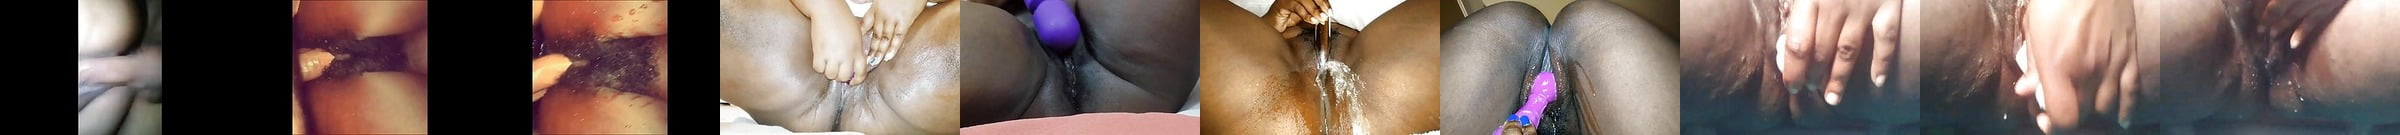 A Few Good Ebony Squirt Compilation Part 20 Free Porn 77 Xhamster